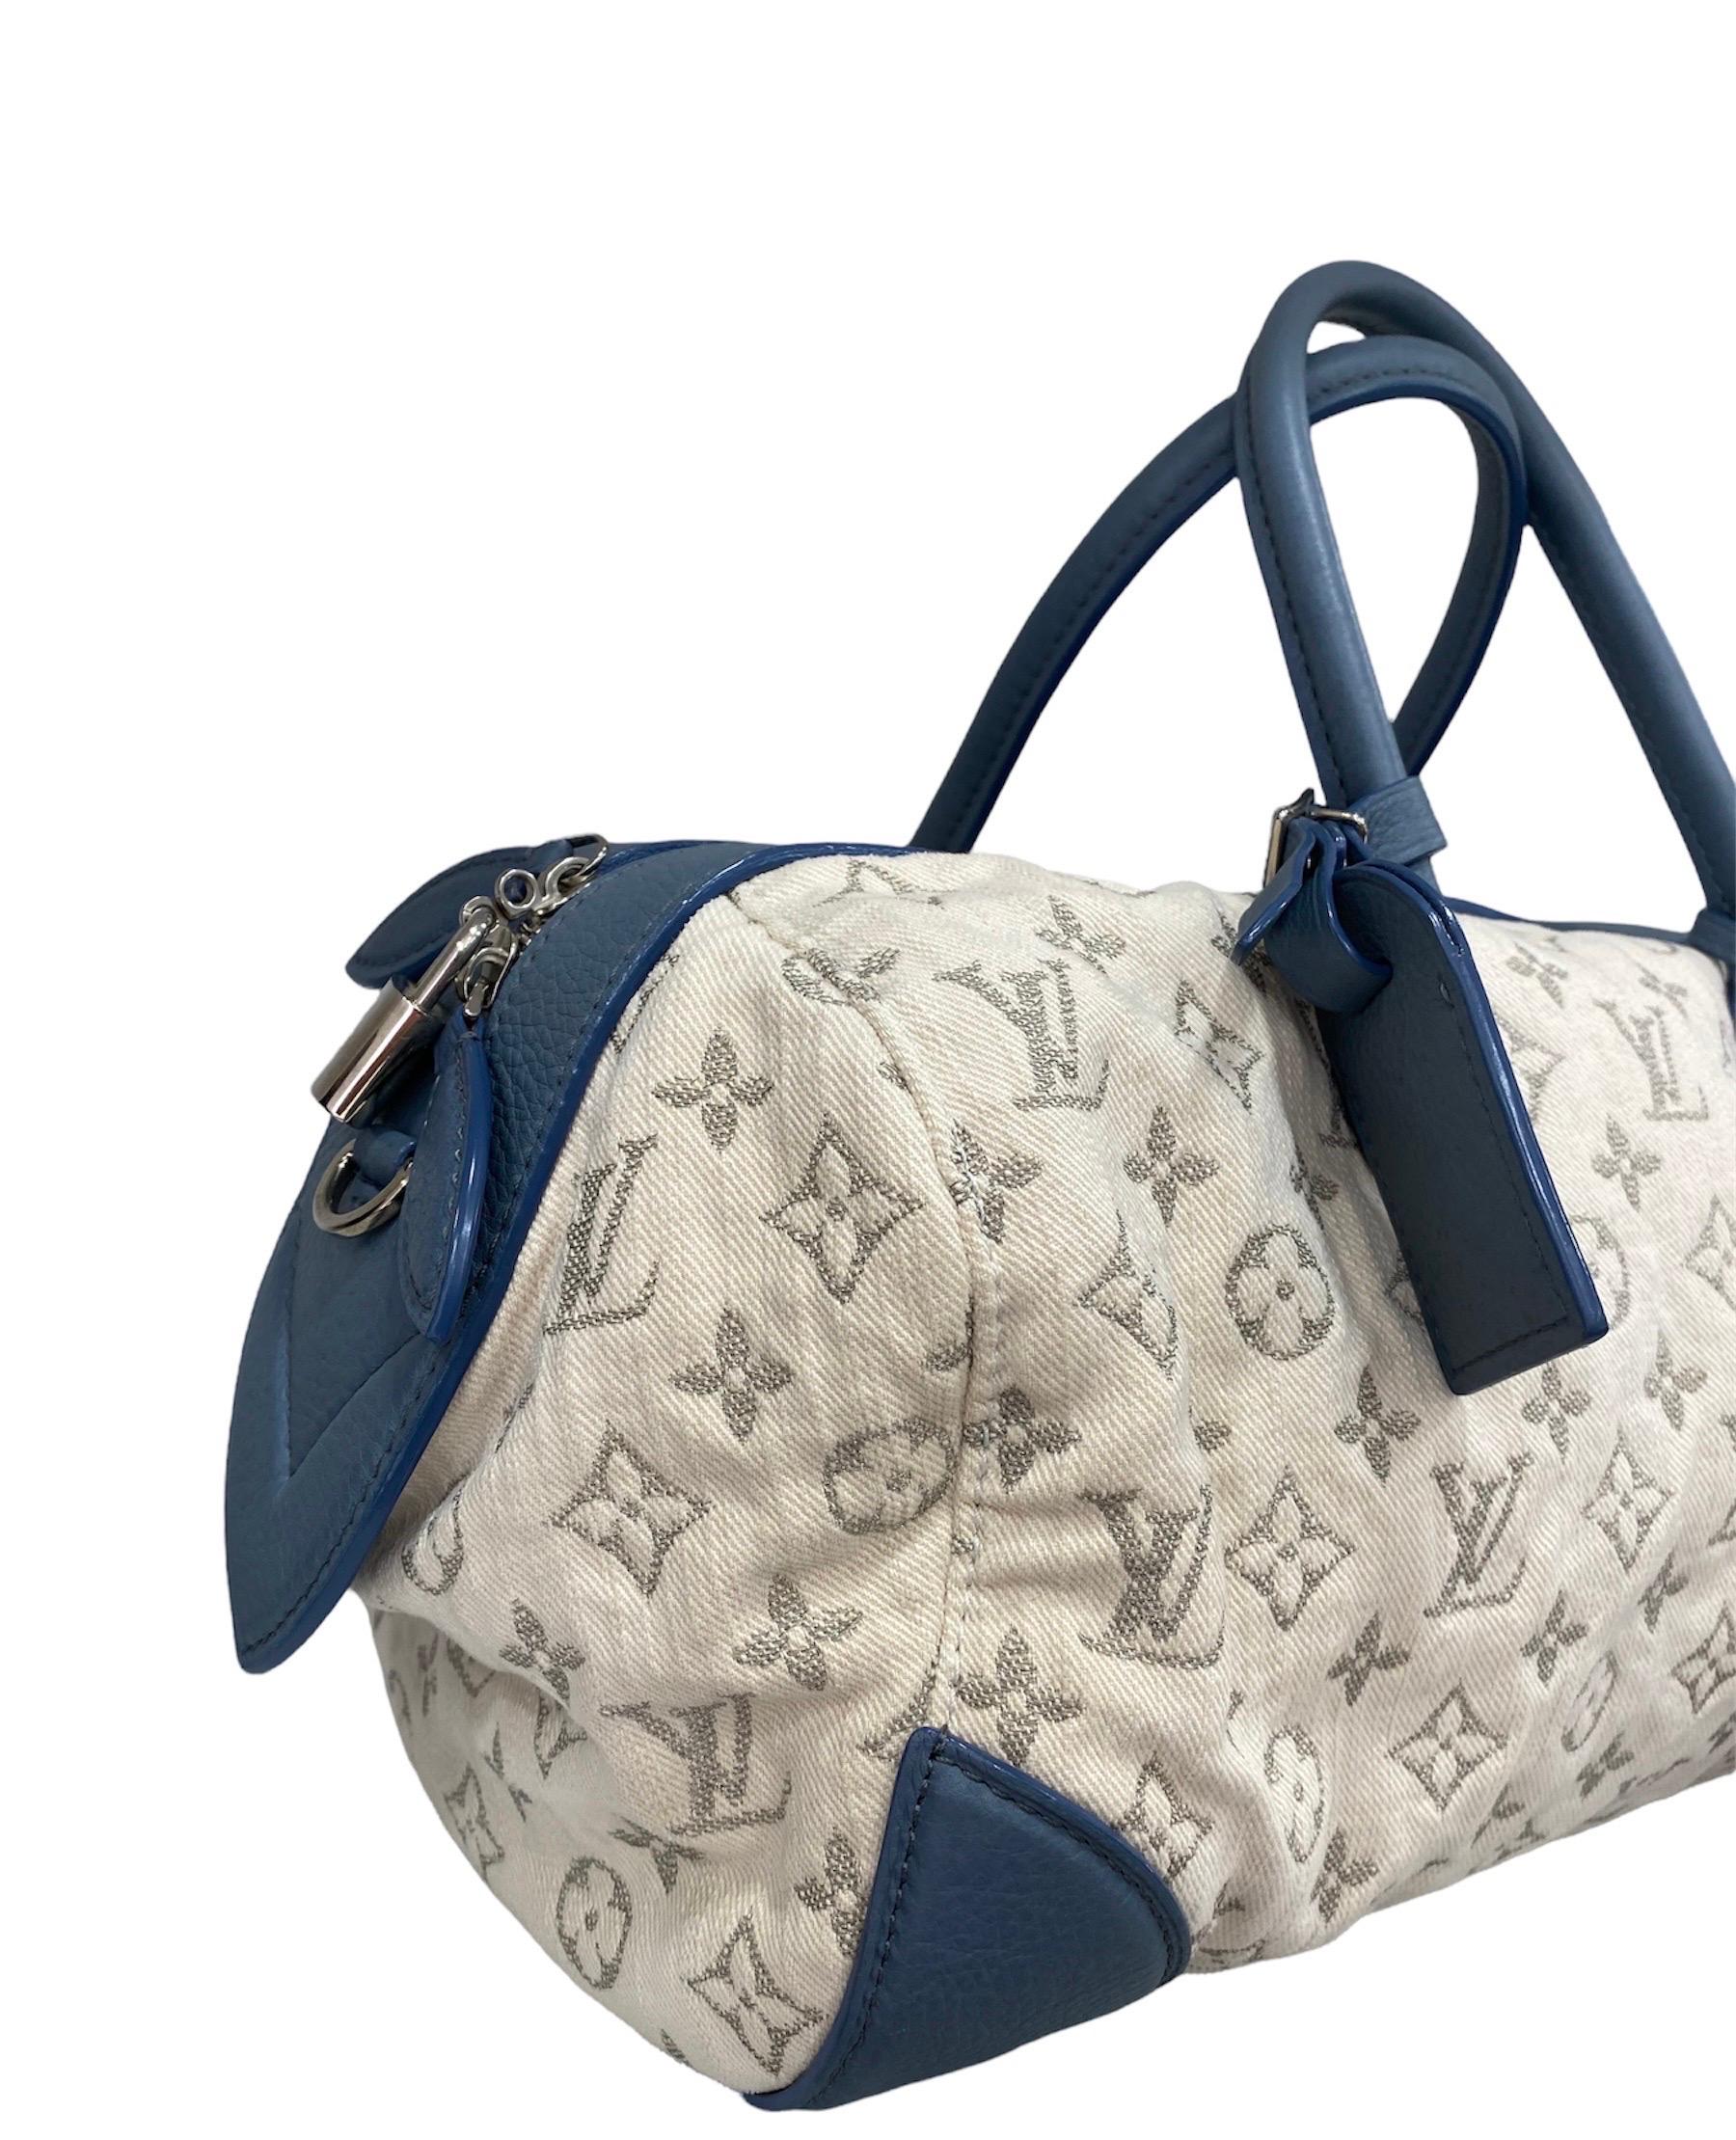 

Handbag signed Louis Vuitton, made of white Mini Lin with blue leather inserts with silver hardwrae.

Equipped with a top zip closure, internally lined in blue suede, very roomy.

Equipped with double rigid leather handle, internal pockets and